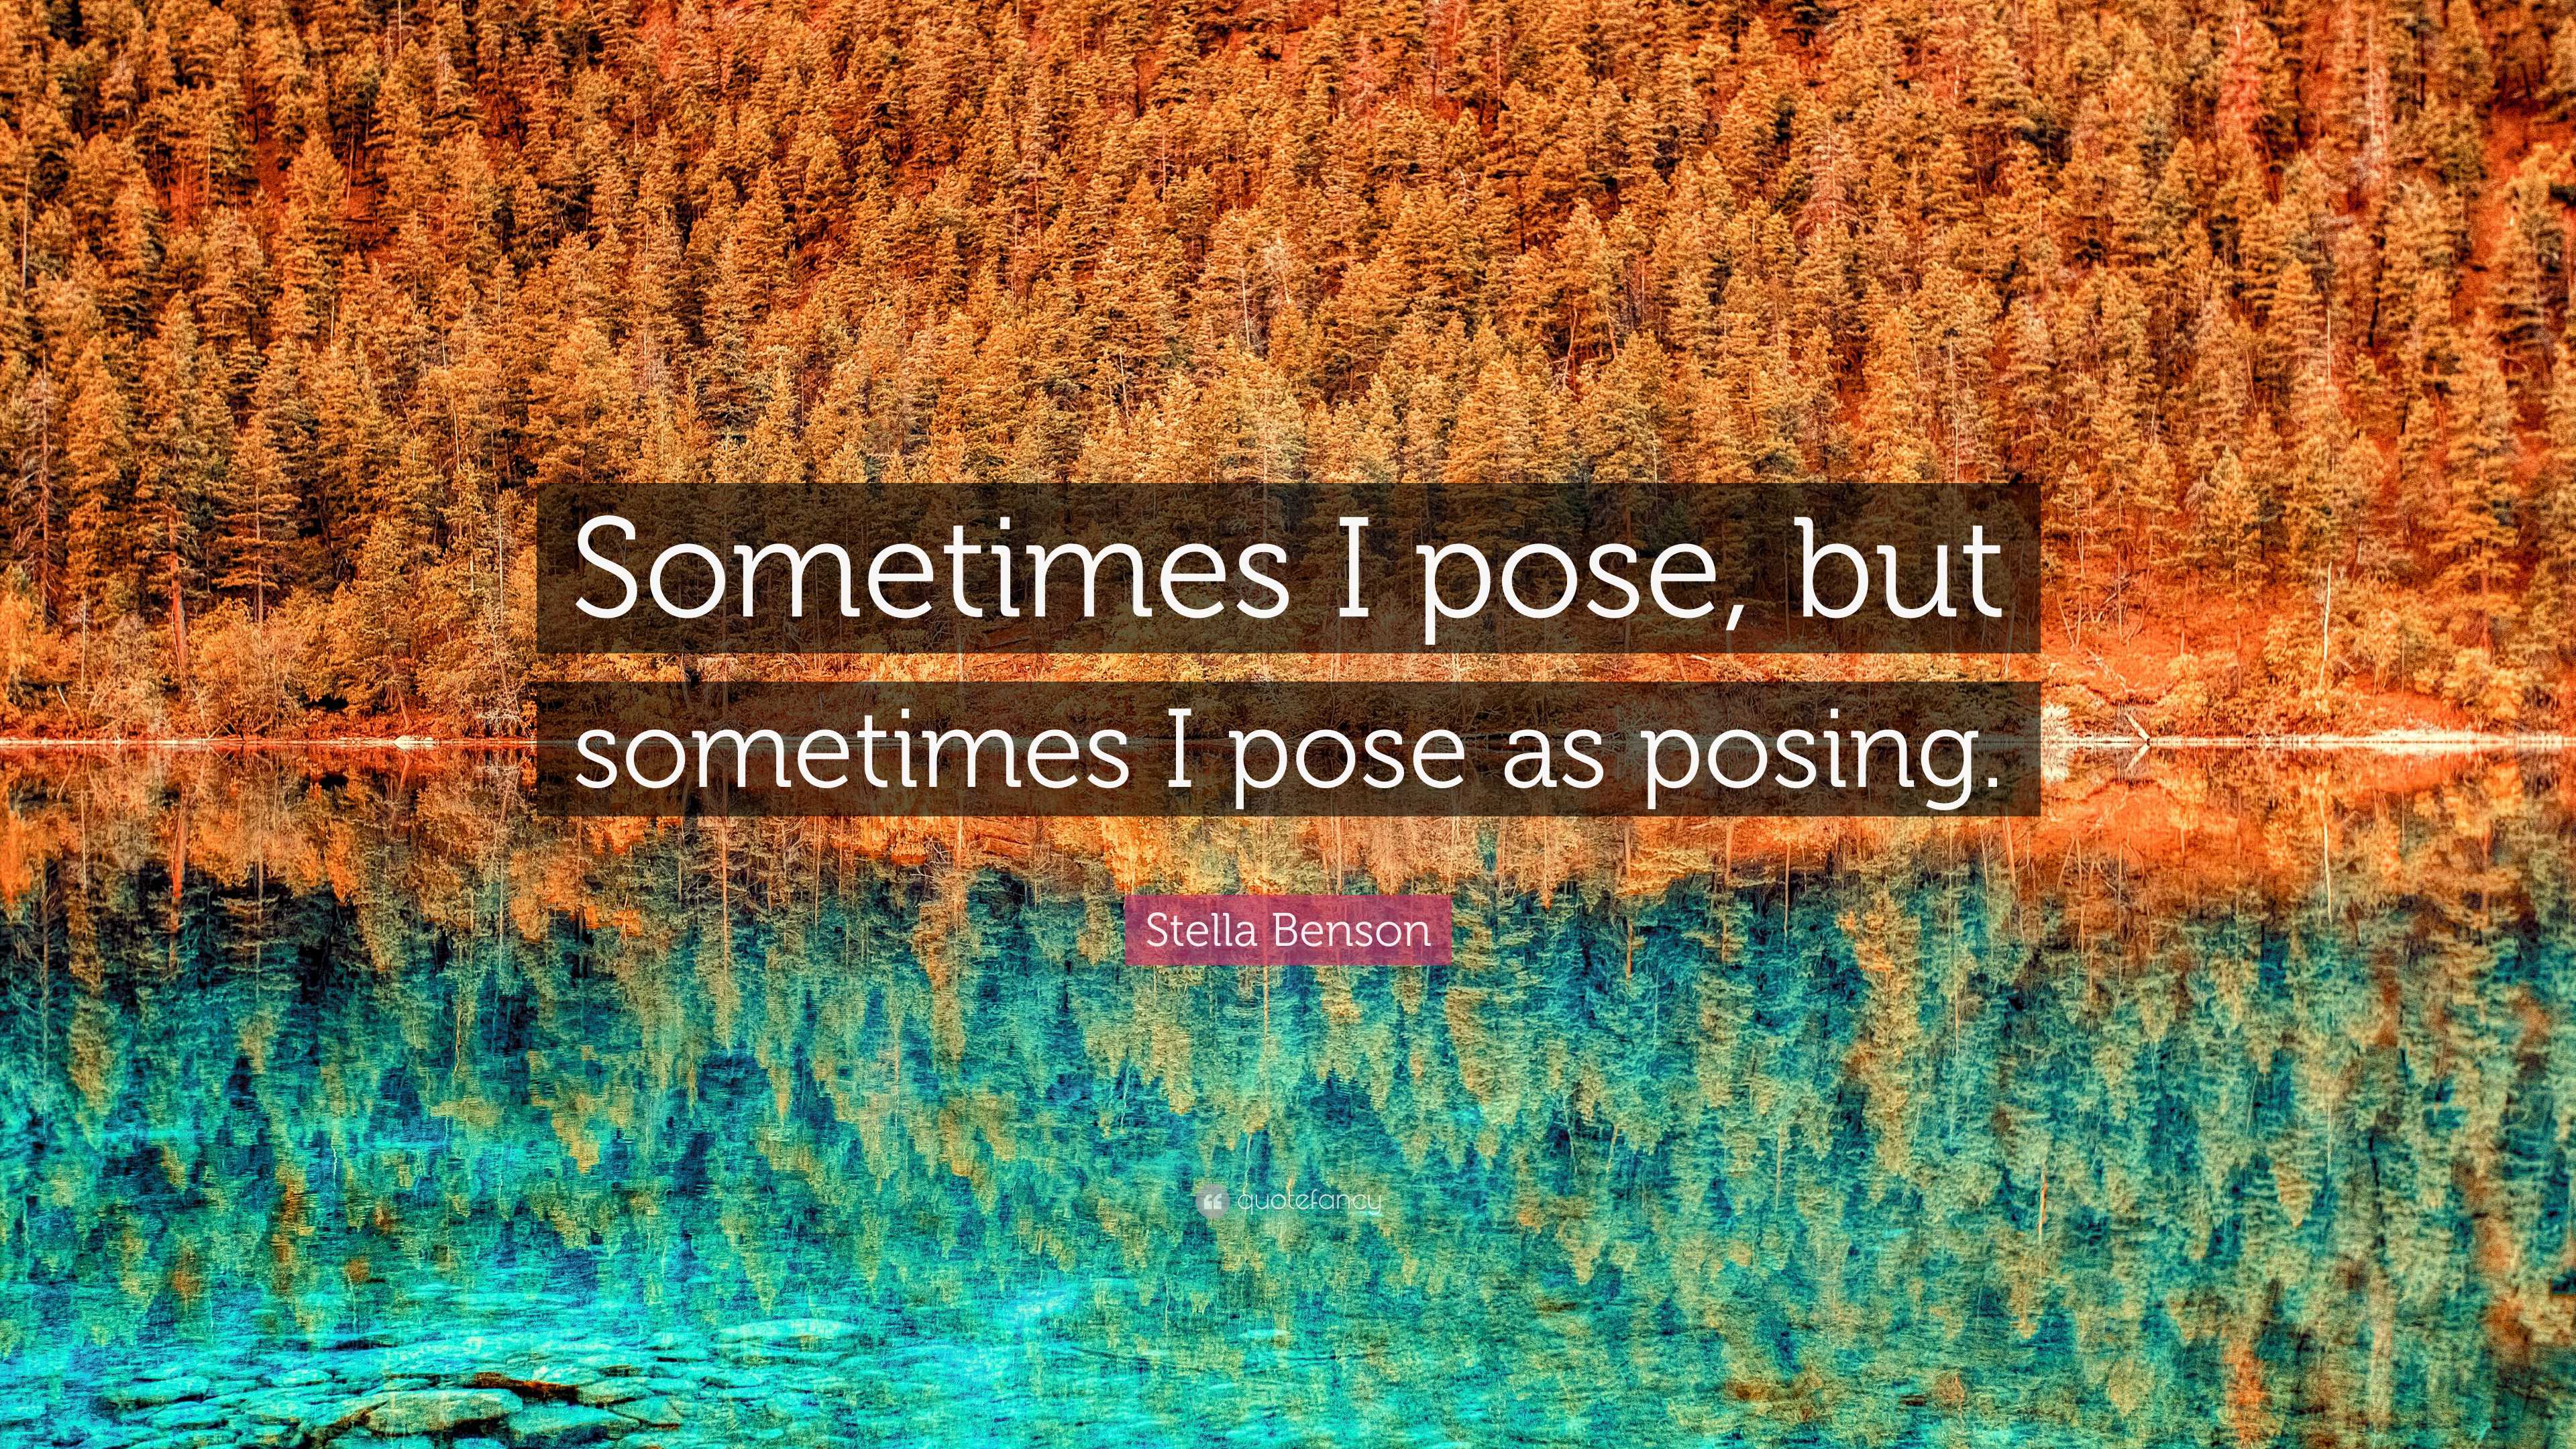 Attitude is like posing for pictures. | Quotes about photography, Camera  quotes, Photography quotes funny